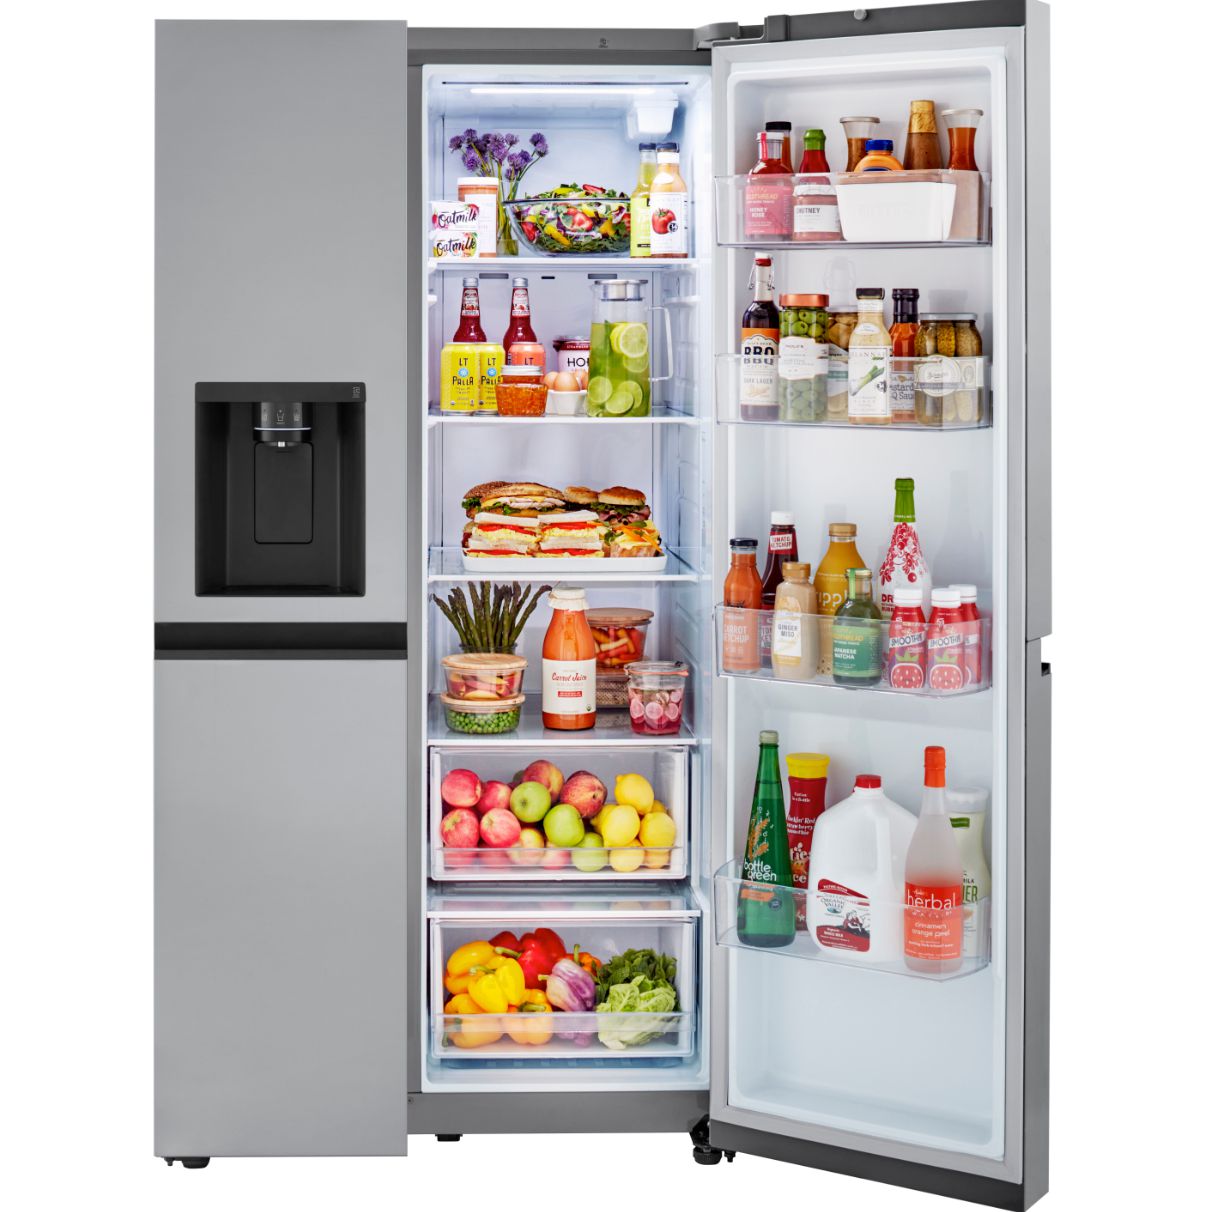 LG 36 Inch Side-by-Side Refrigerator in Stainless Steel 27 Cu. Ft. (LRSXS2706S)